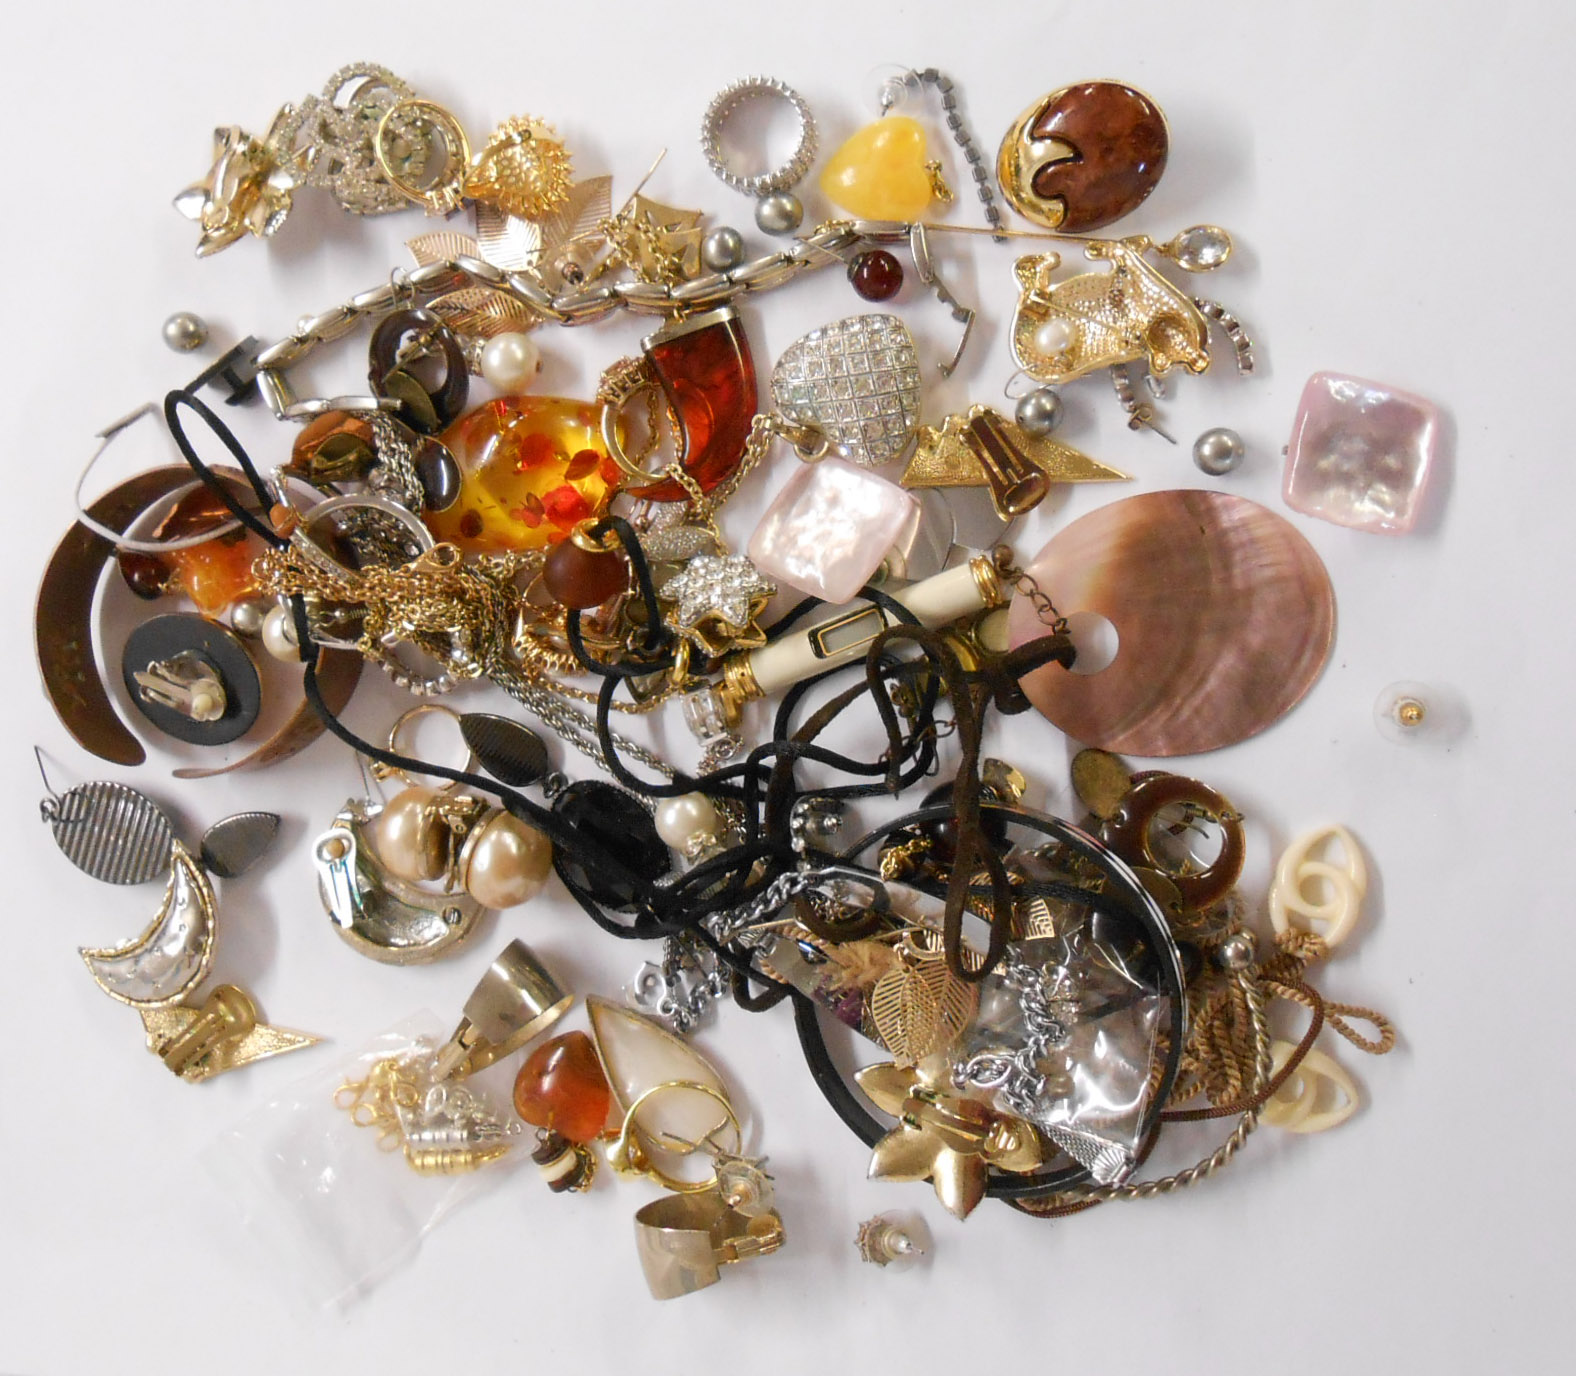 A bag containing a small collection of assorted costume jewellery